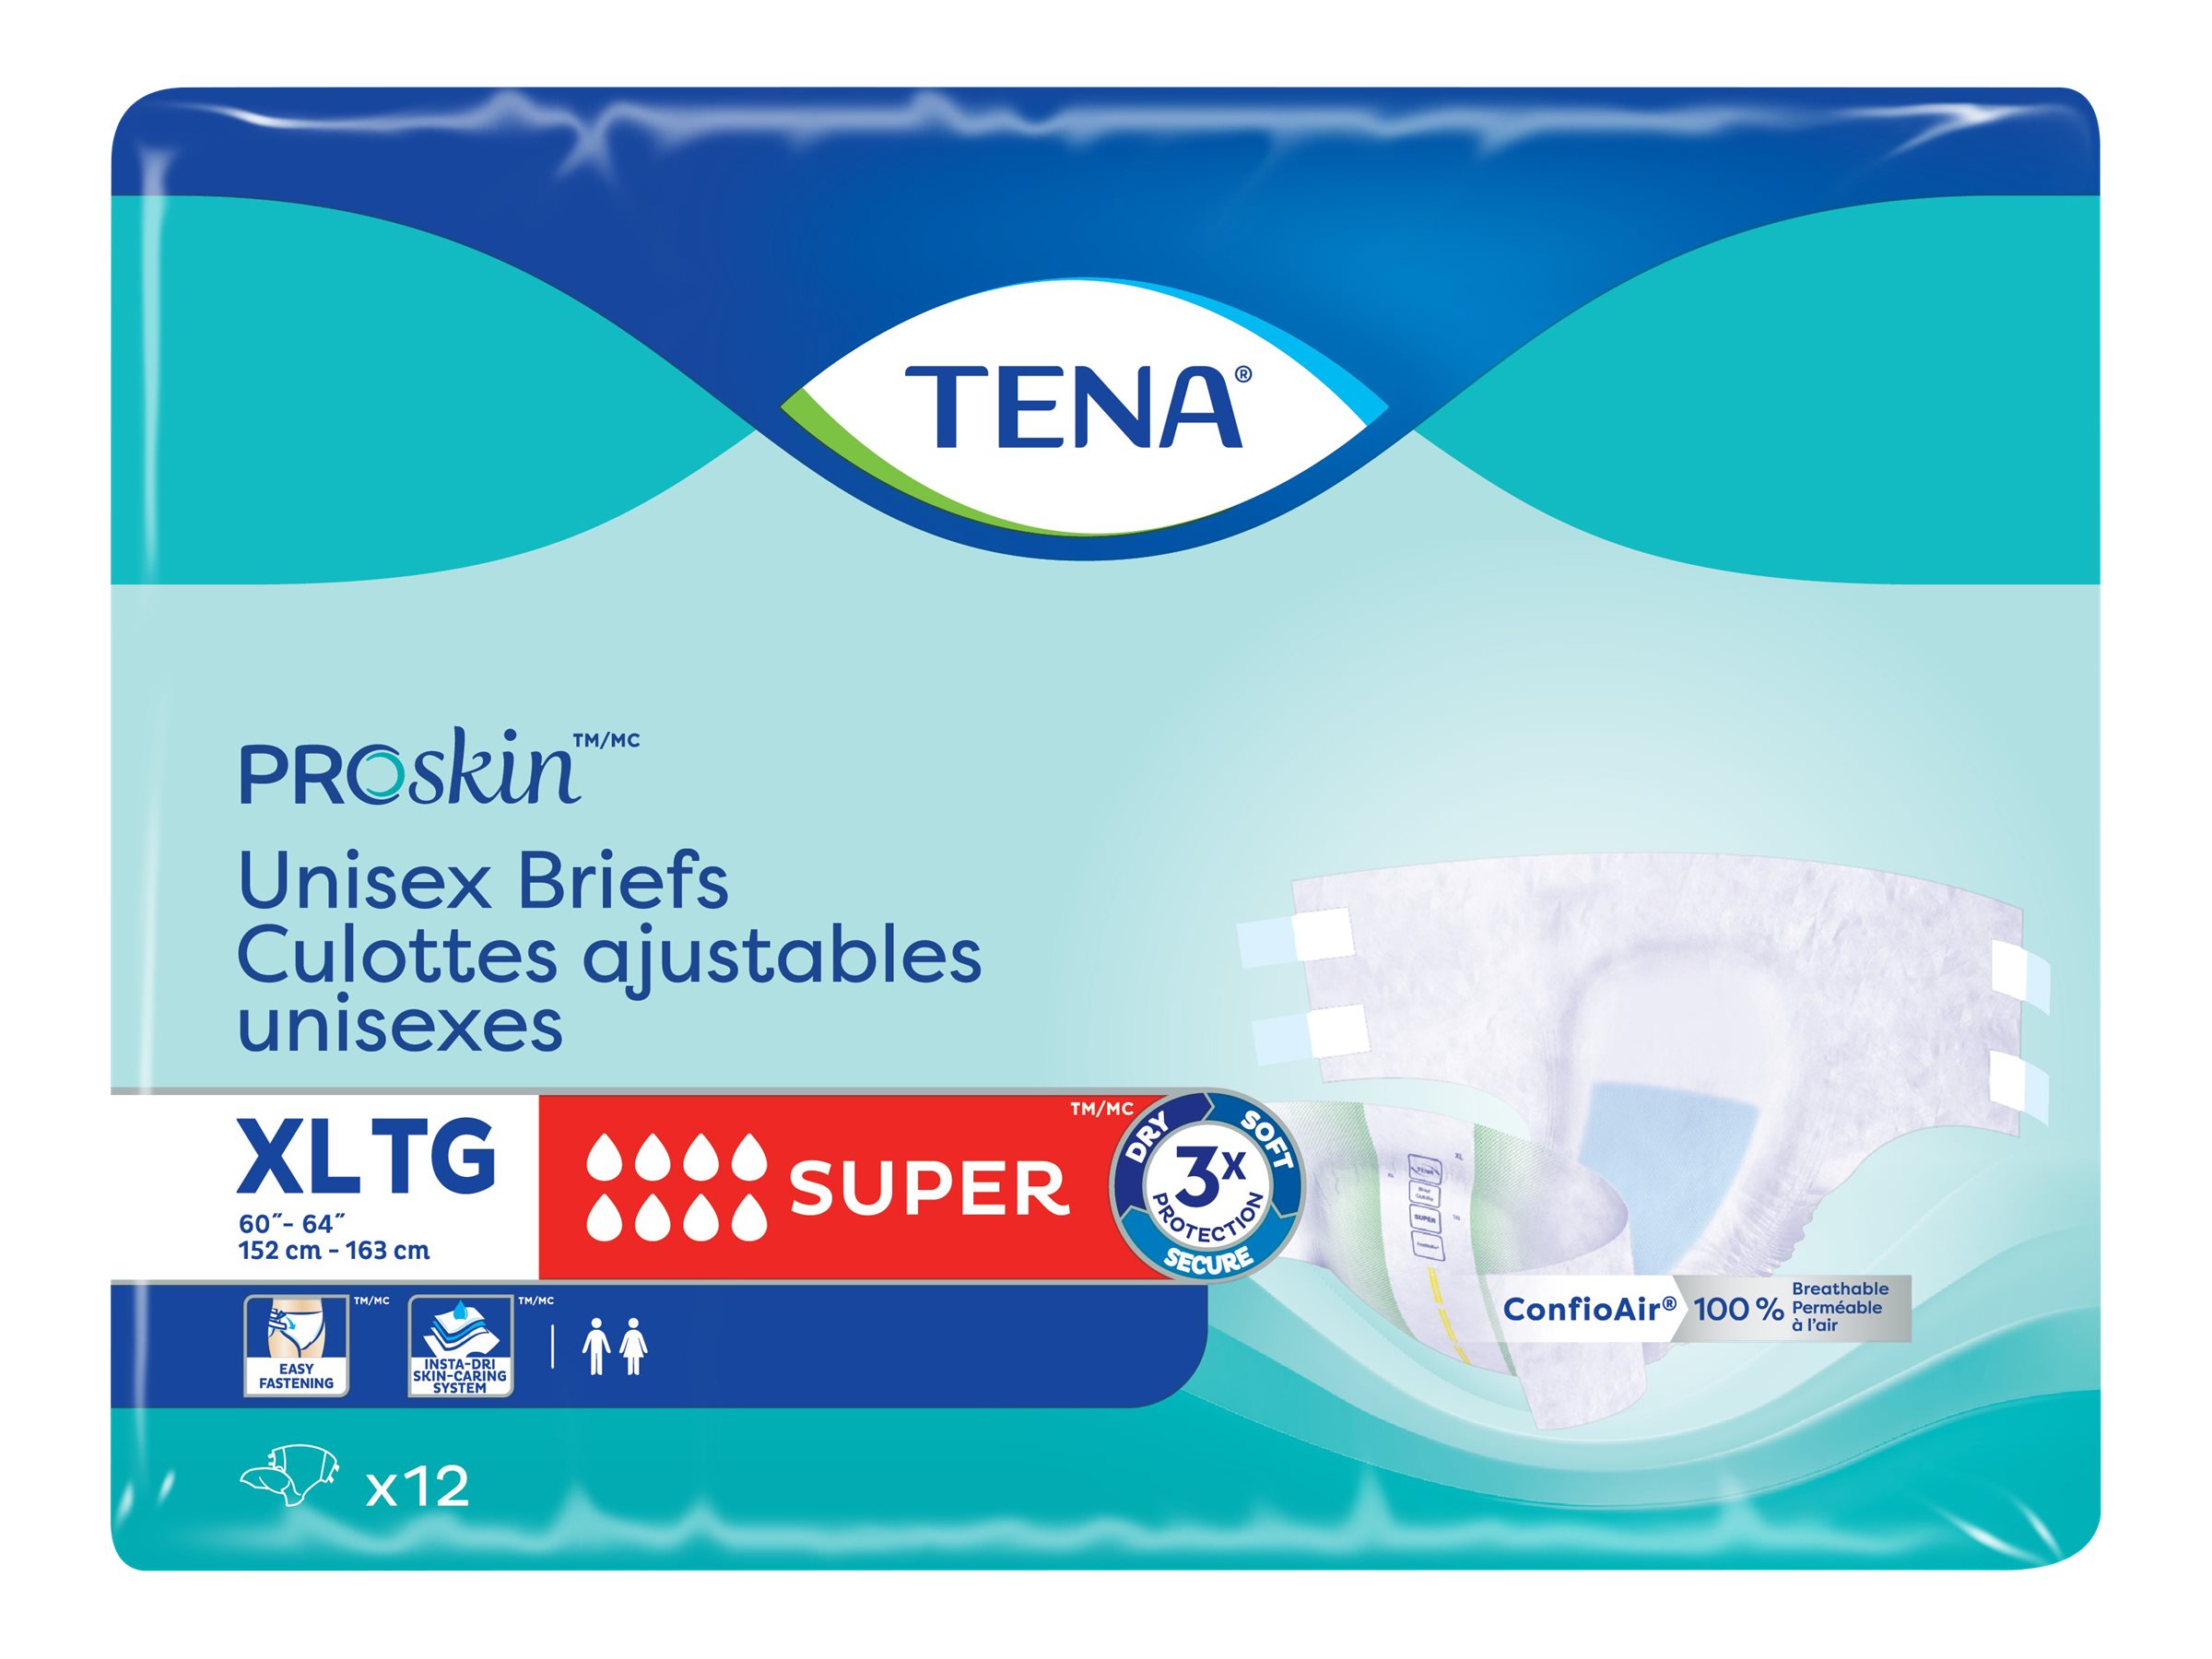 Tena Overnight Super Absorbent Underwear, Extra Large (12 Count